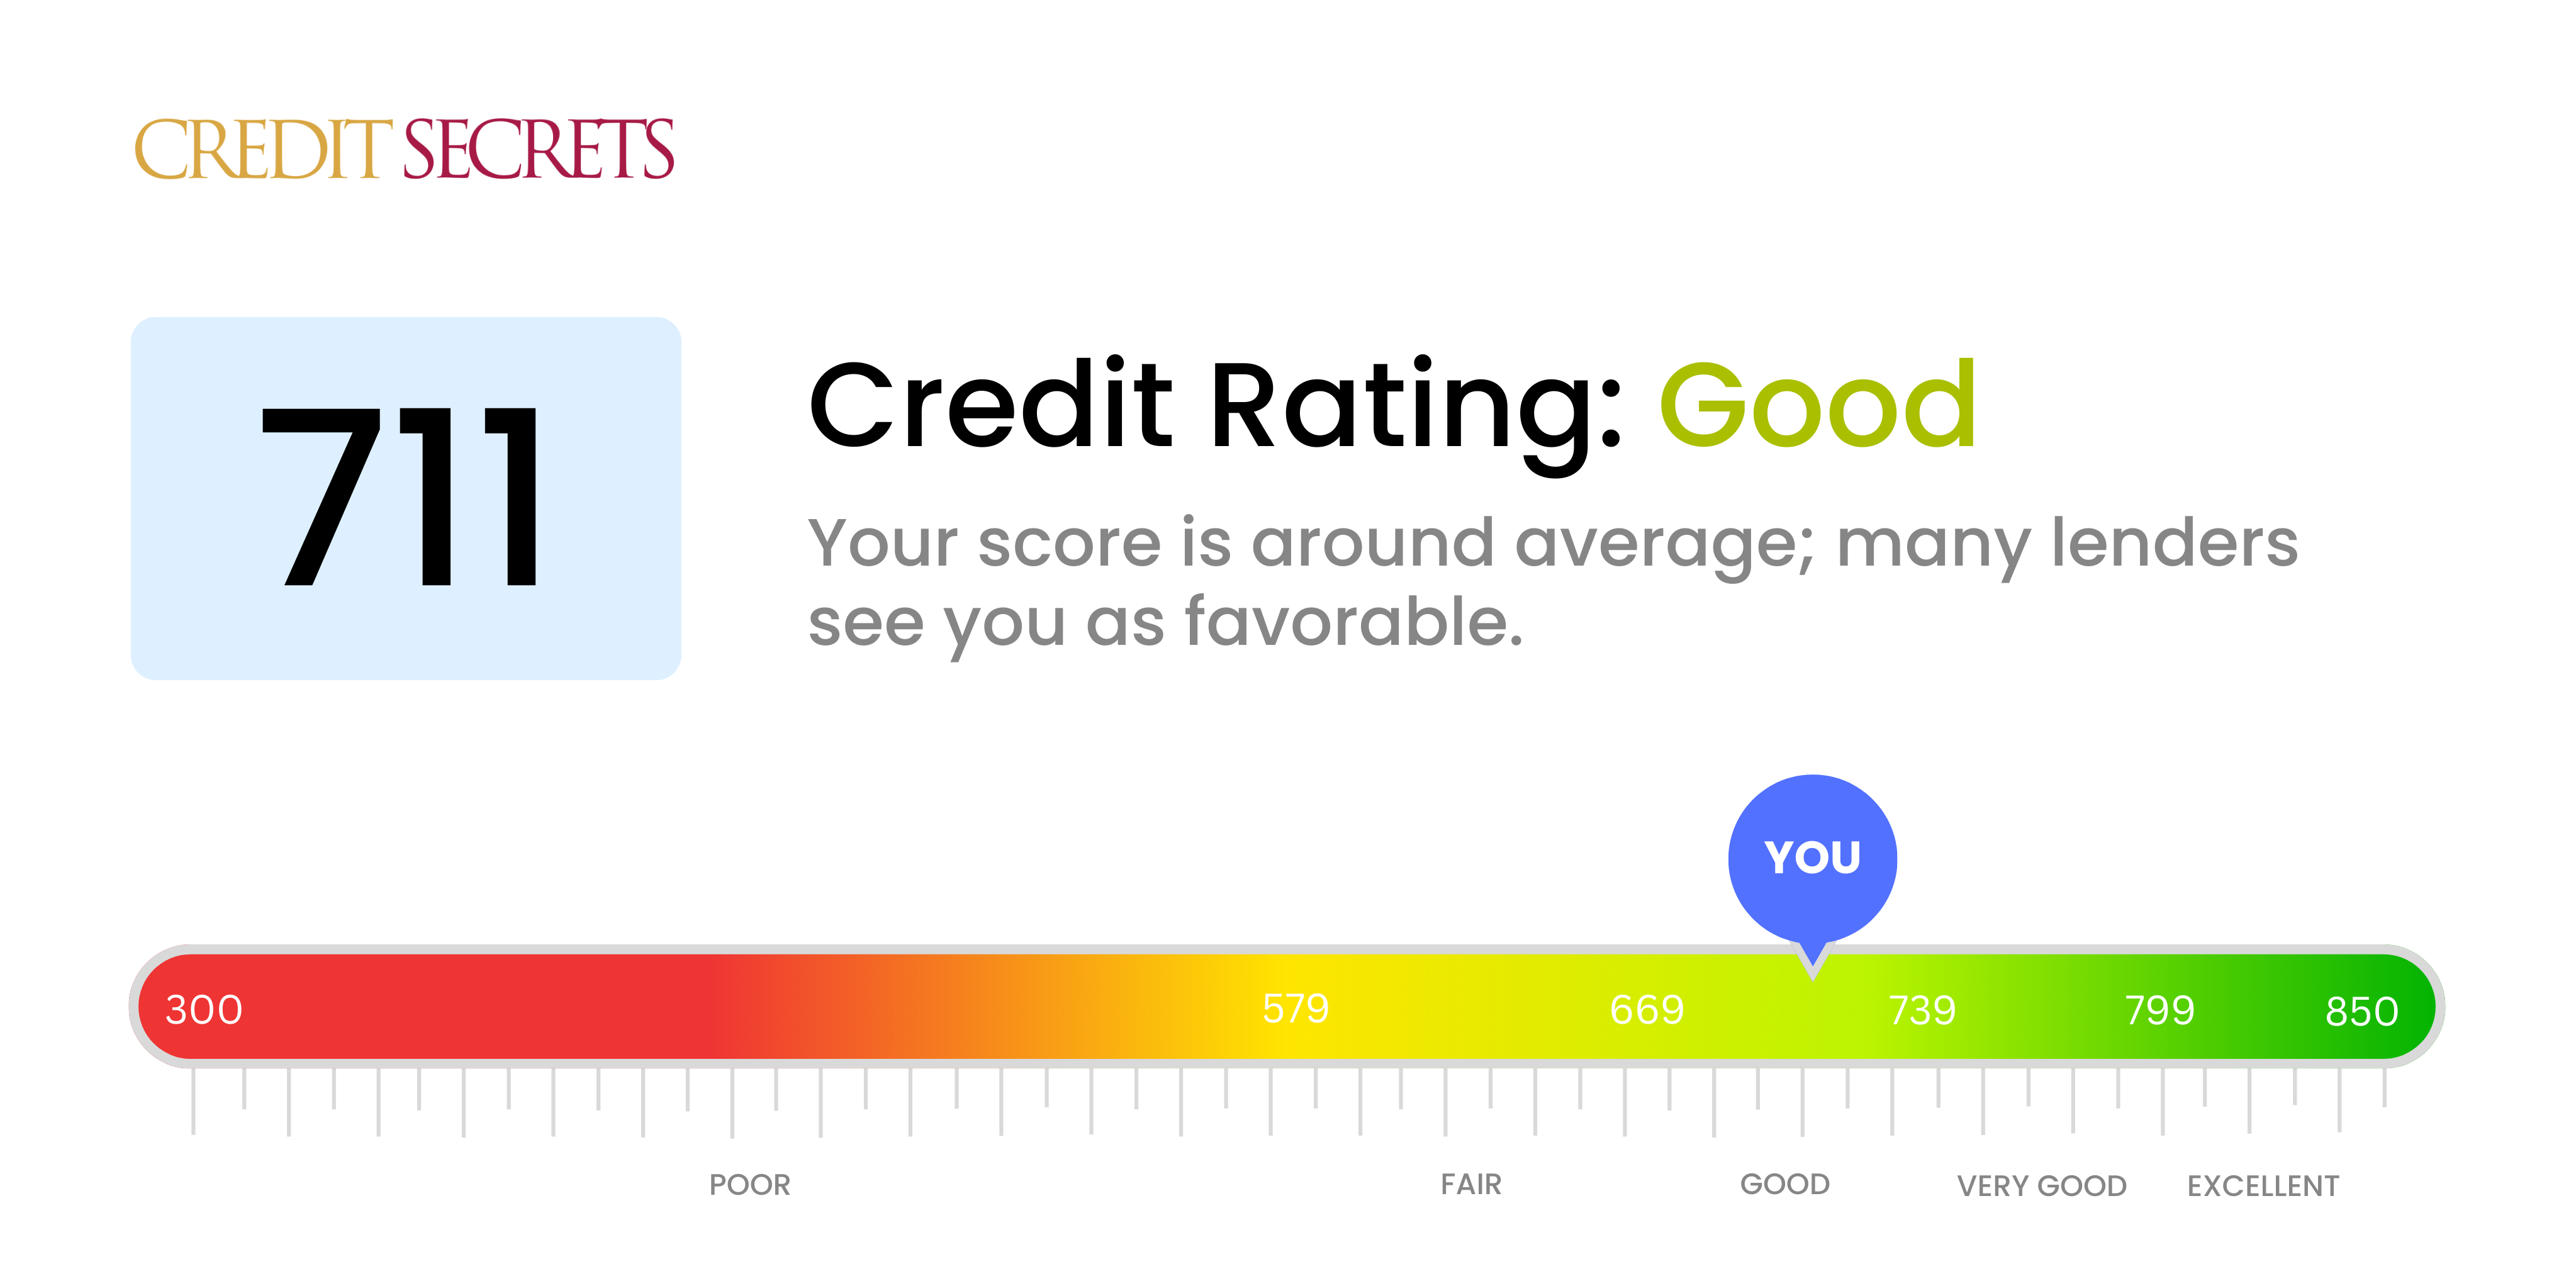 Is 711 a good credit score?